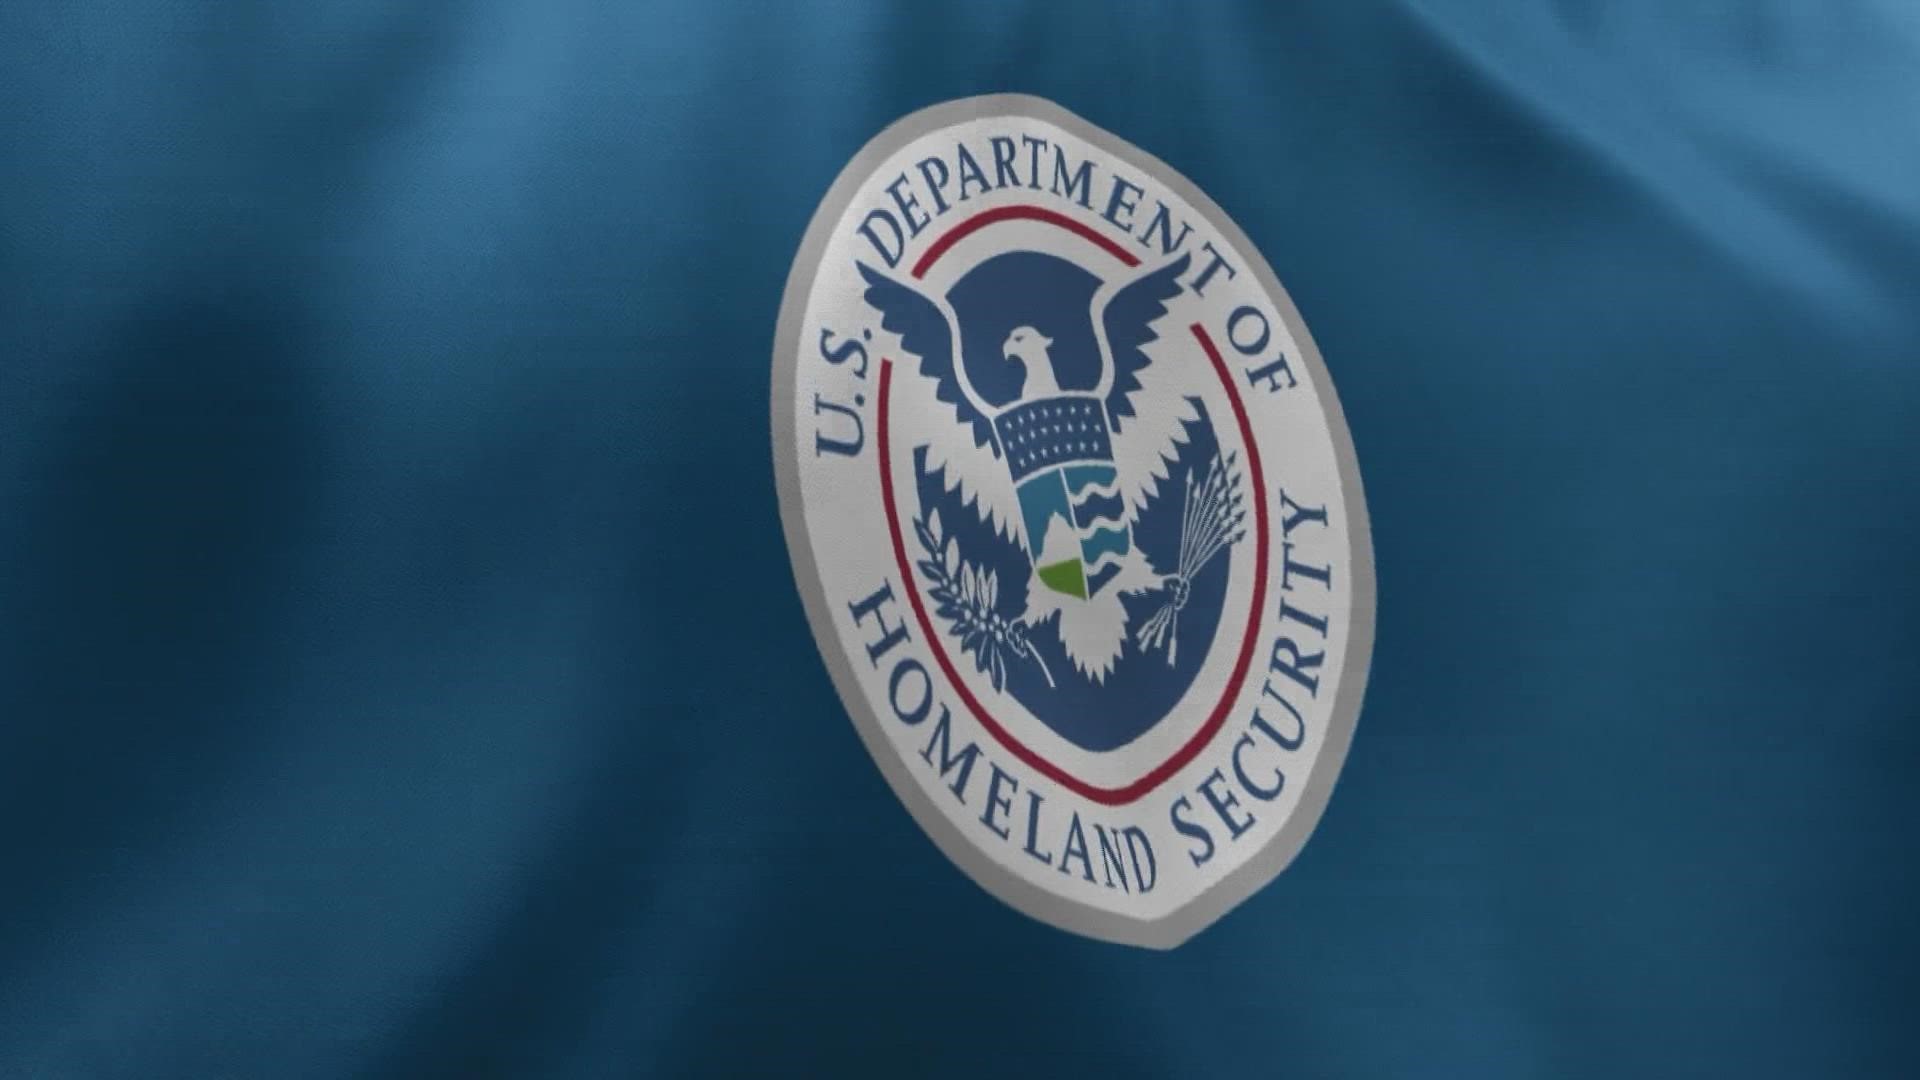 The Department of Homeland Security released a new bulletin naming minority groups who are "targets of potential violence," including the LGBTQ and Jewish communties